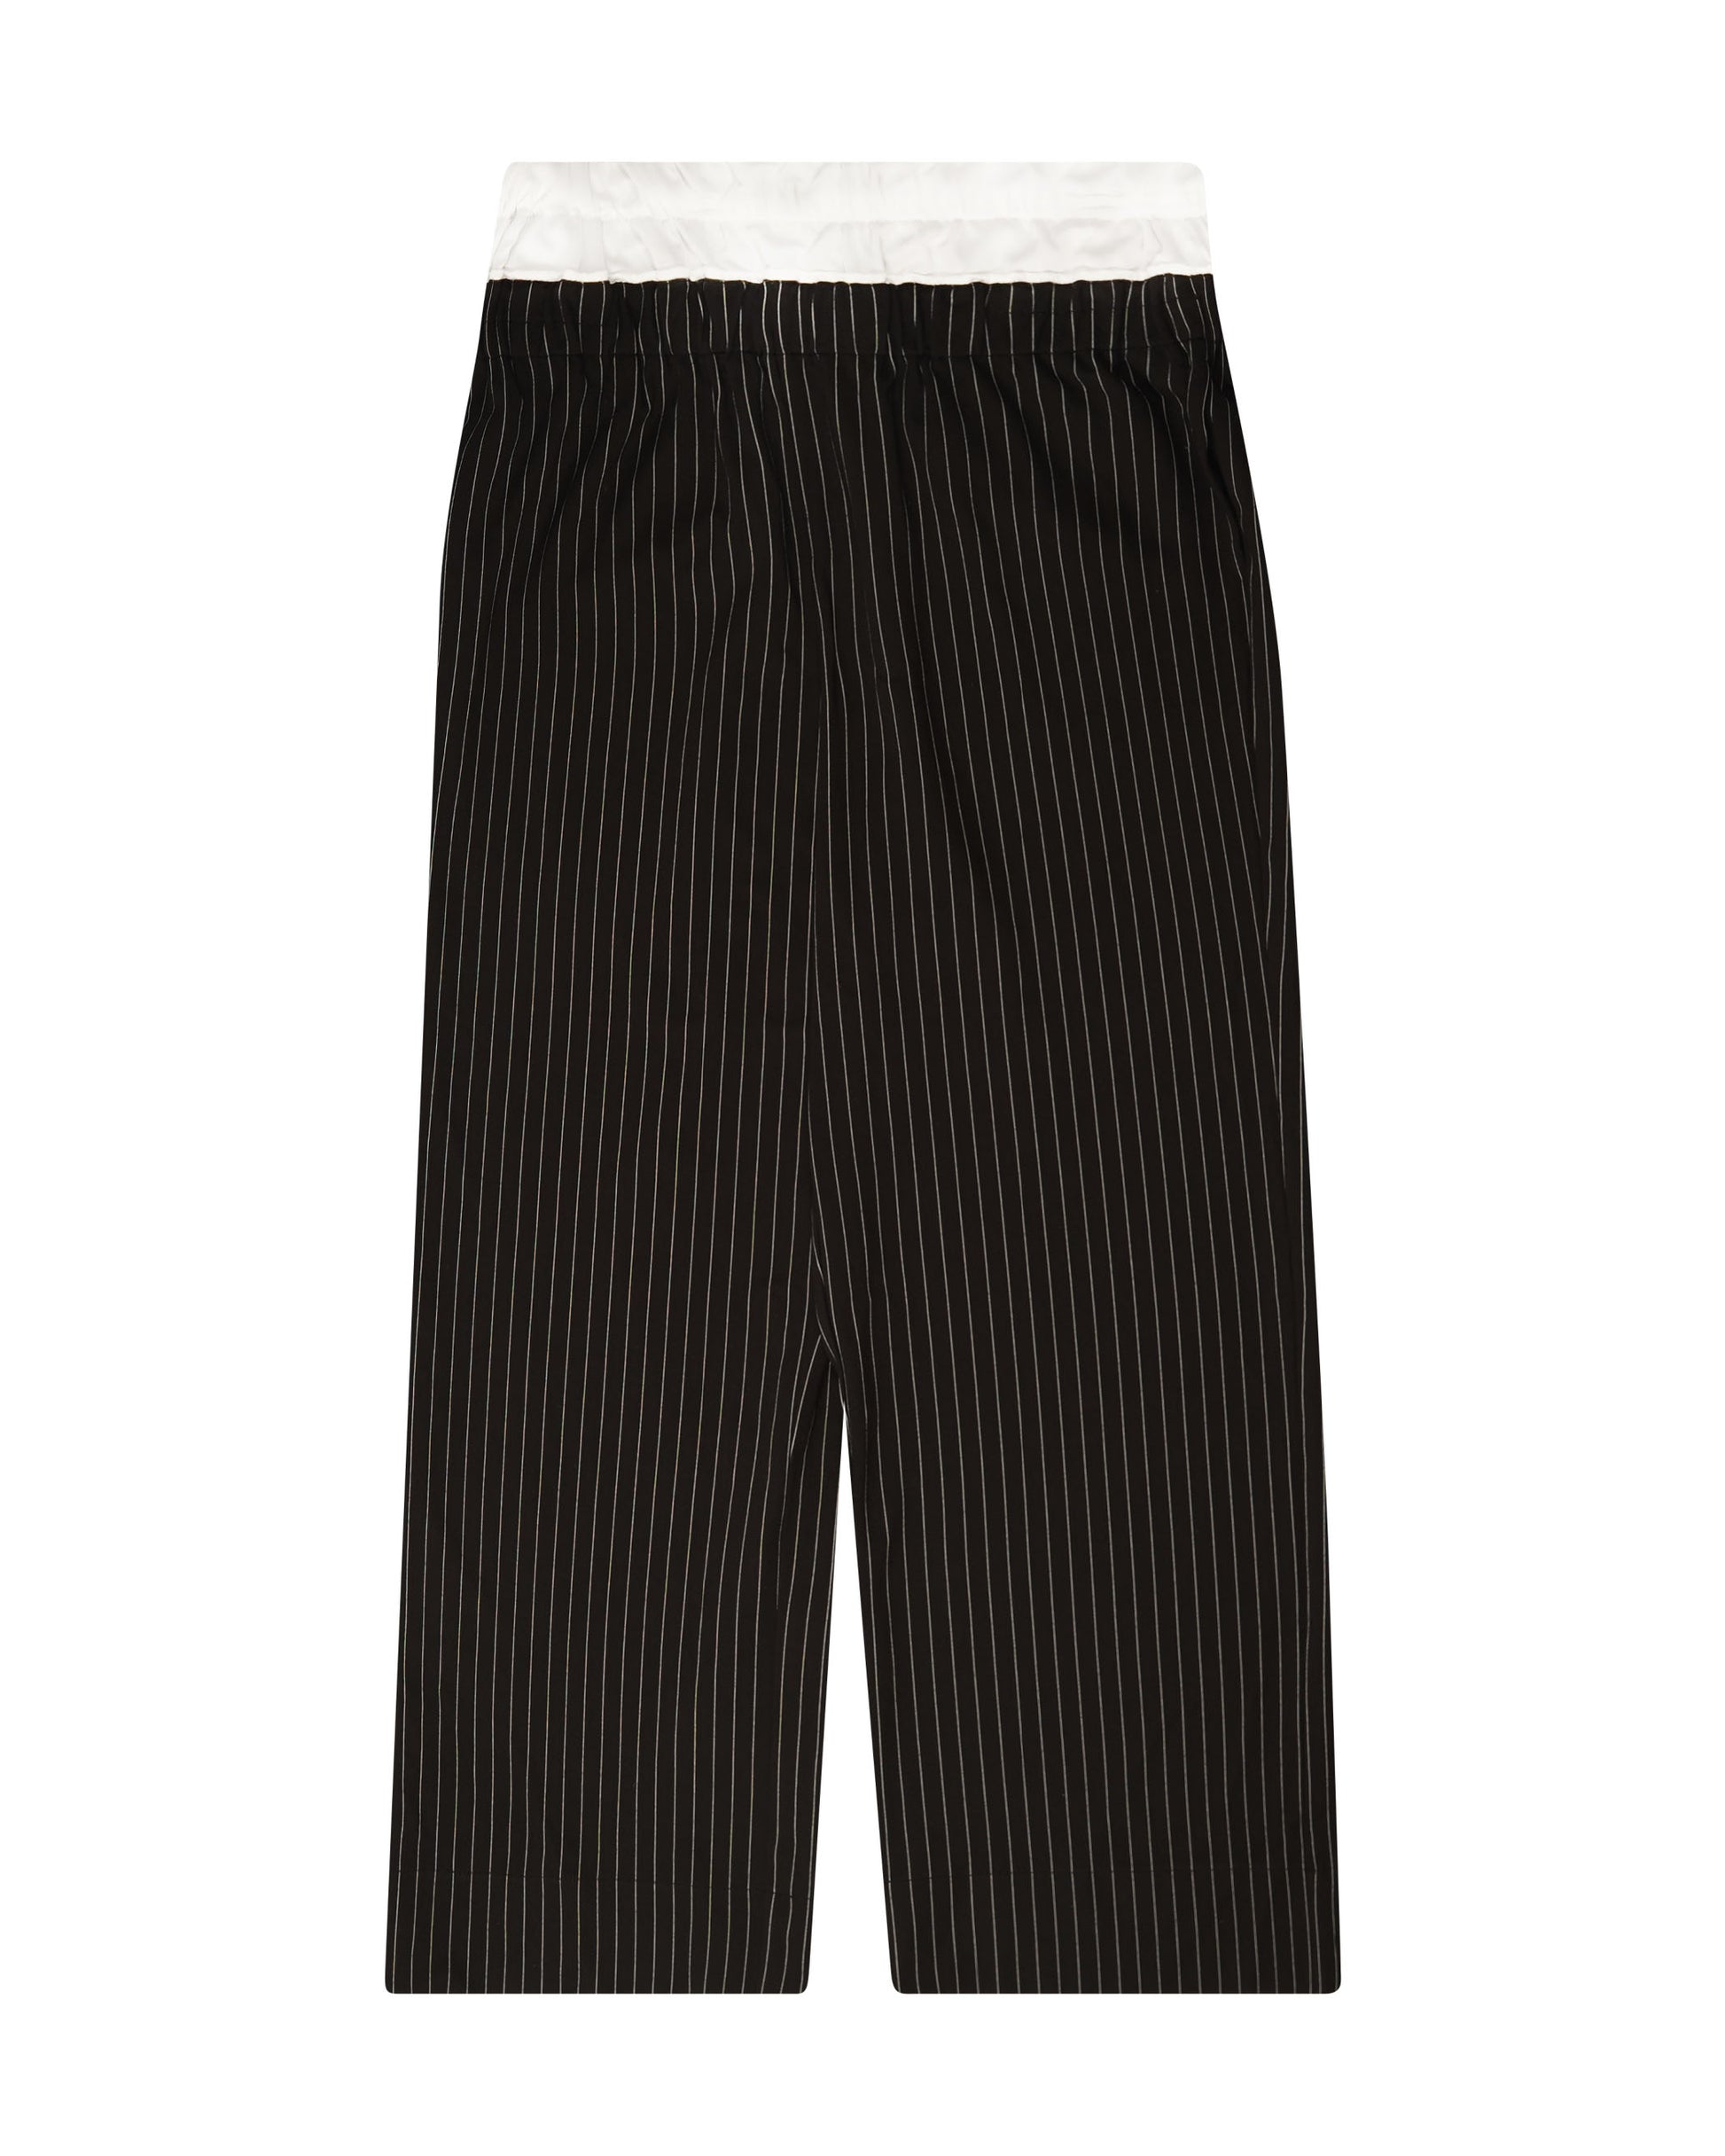 Pinstripe Duple Trousers by Mind Less